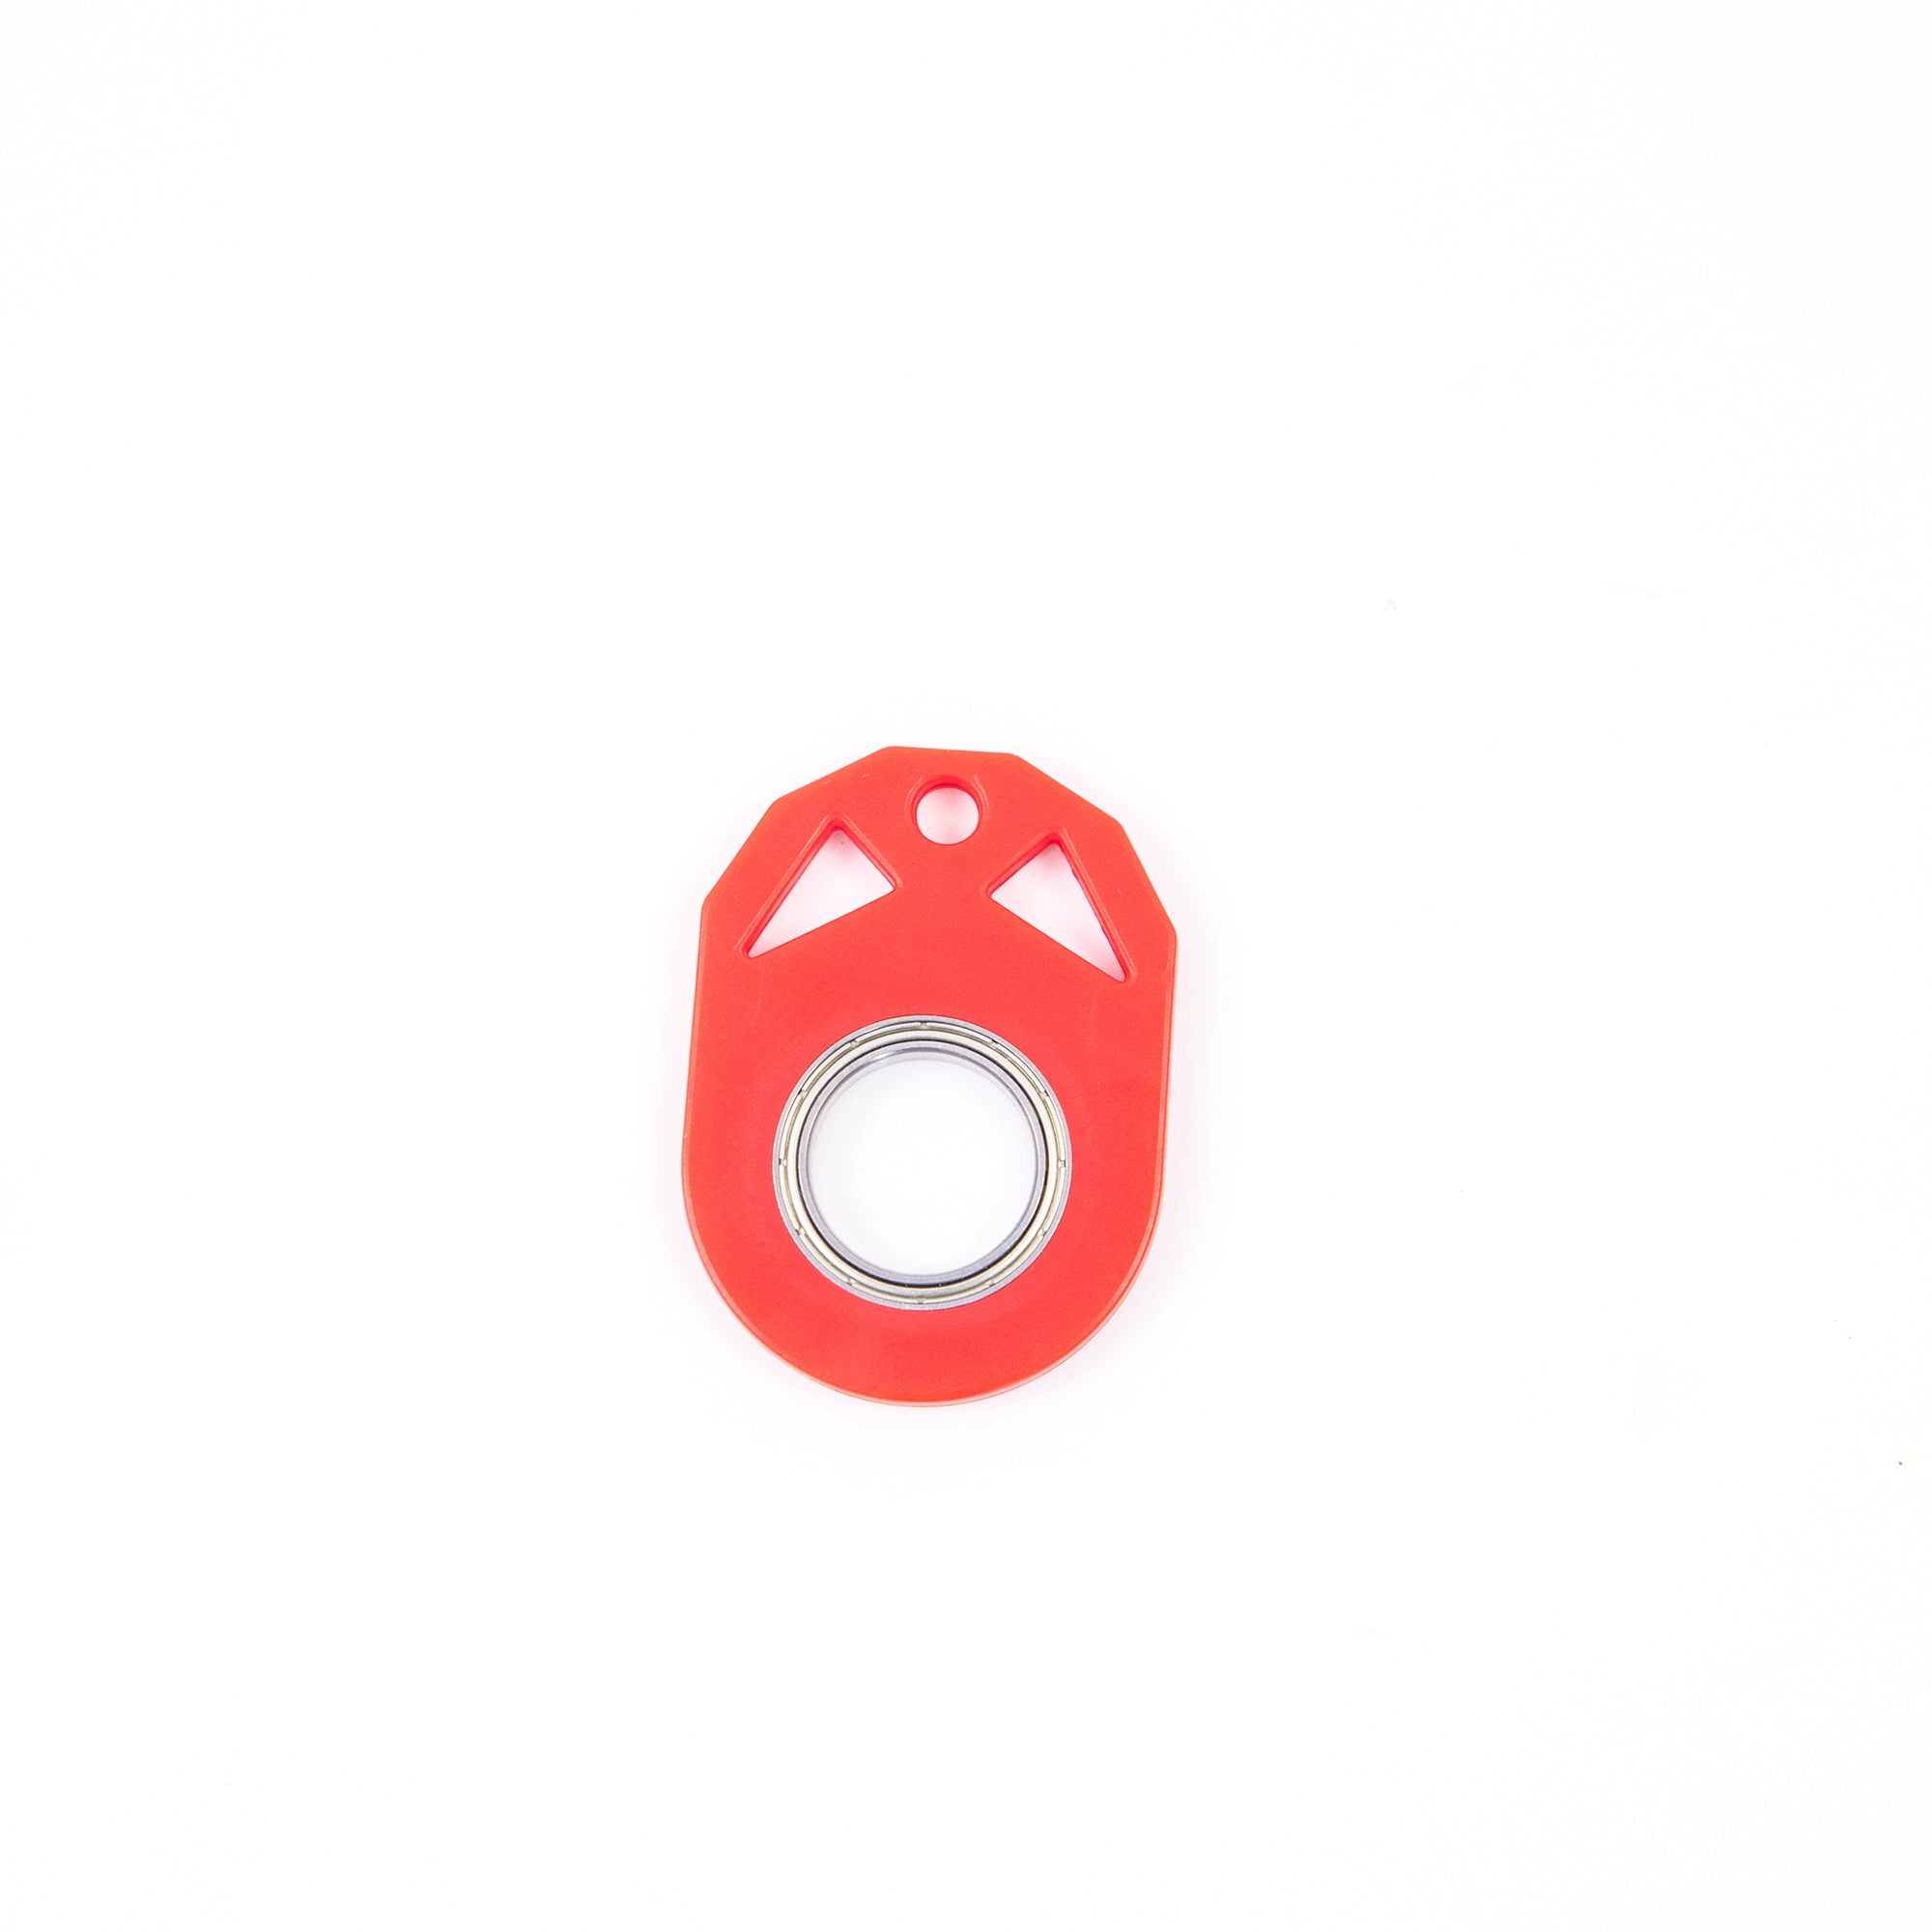 Creative Fidget Spinner Keychain Hand Spinner: Anti Stress Toy for Stress Reduction, Finger Spinner Keychain with Bottle Opener, Kids Toy.